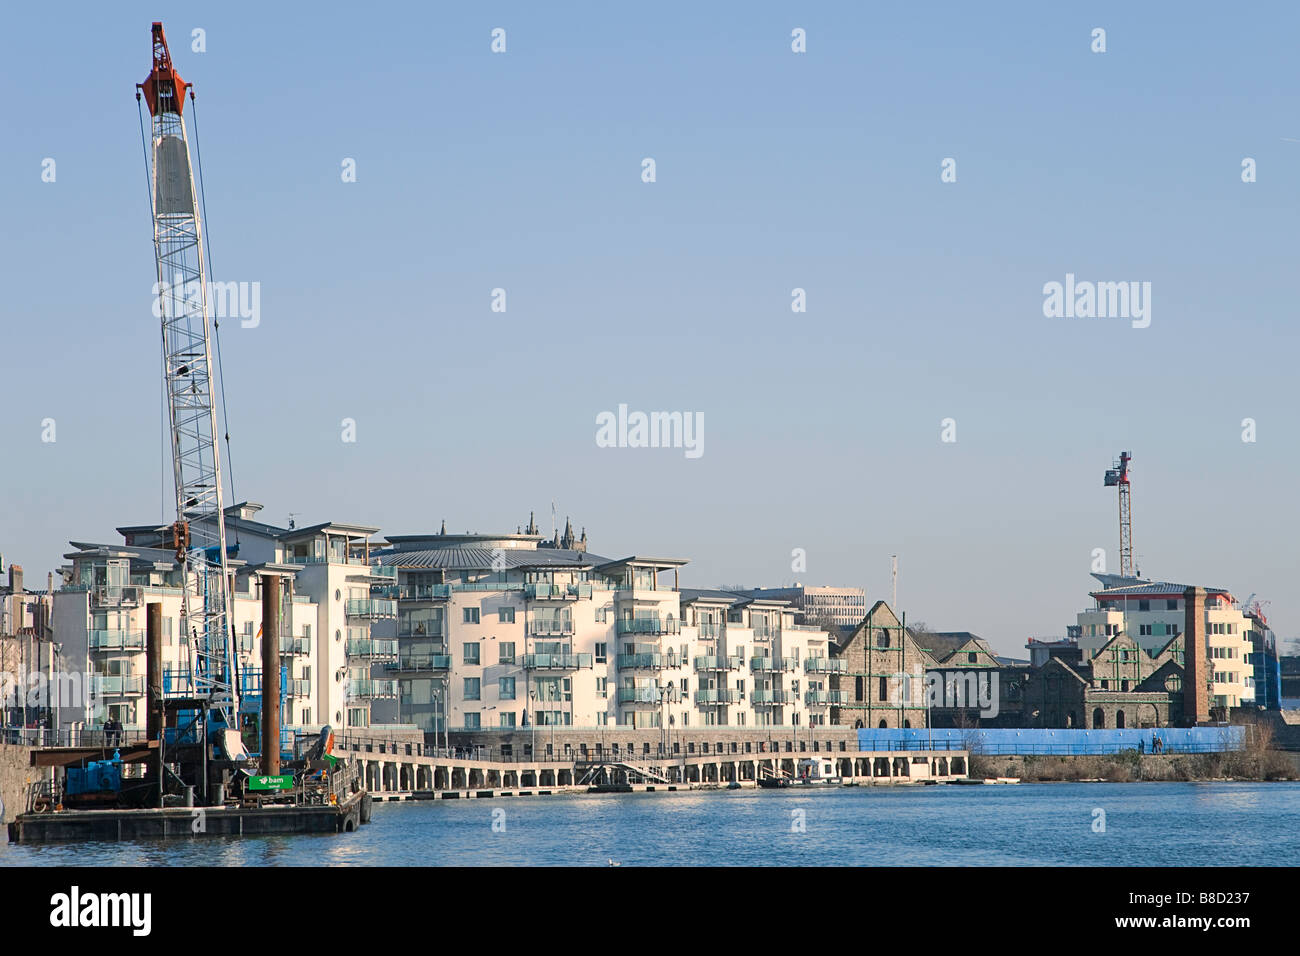 Bristol Floating Harbour Lattice Boom Floating Crane With New Housing Development & Listed Building Behind Stock Photo